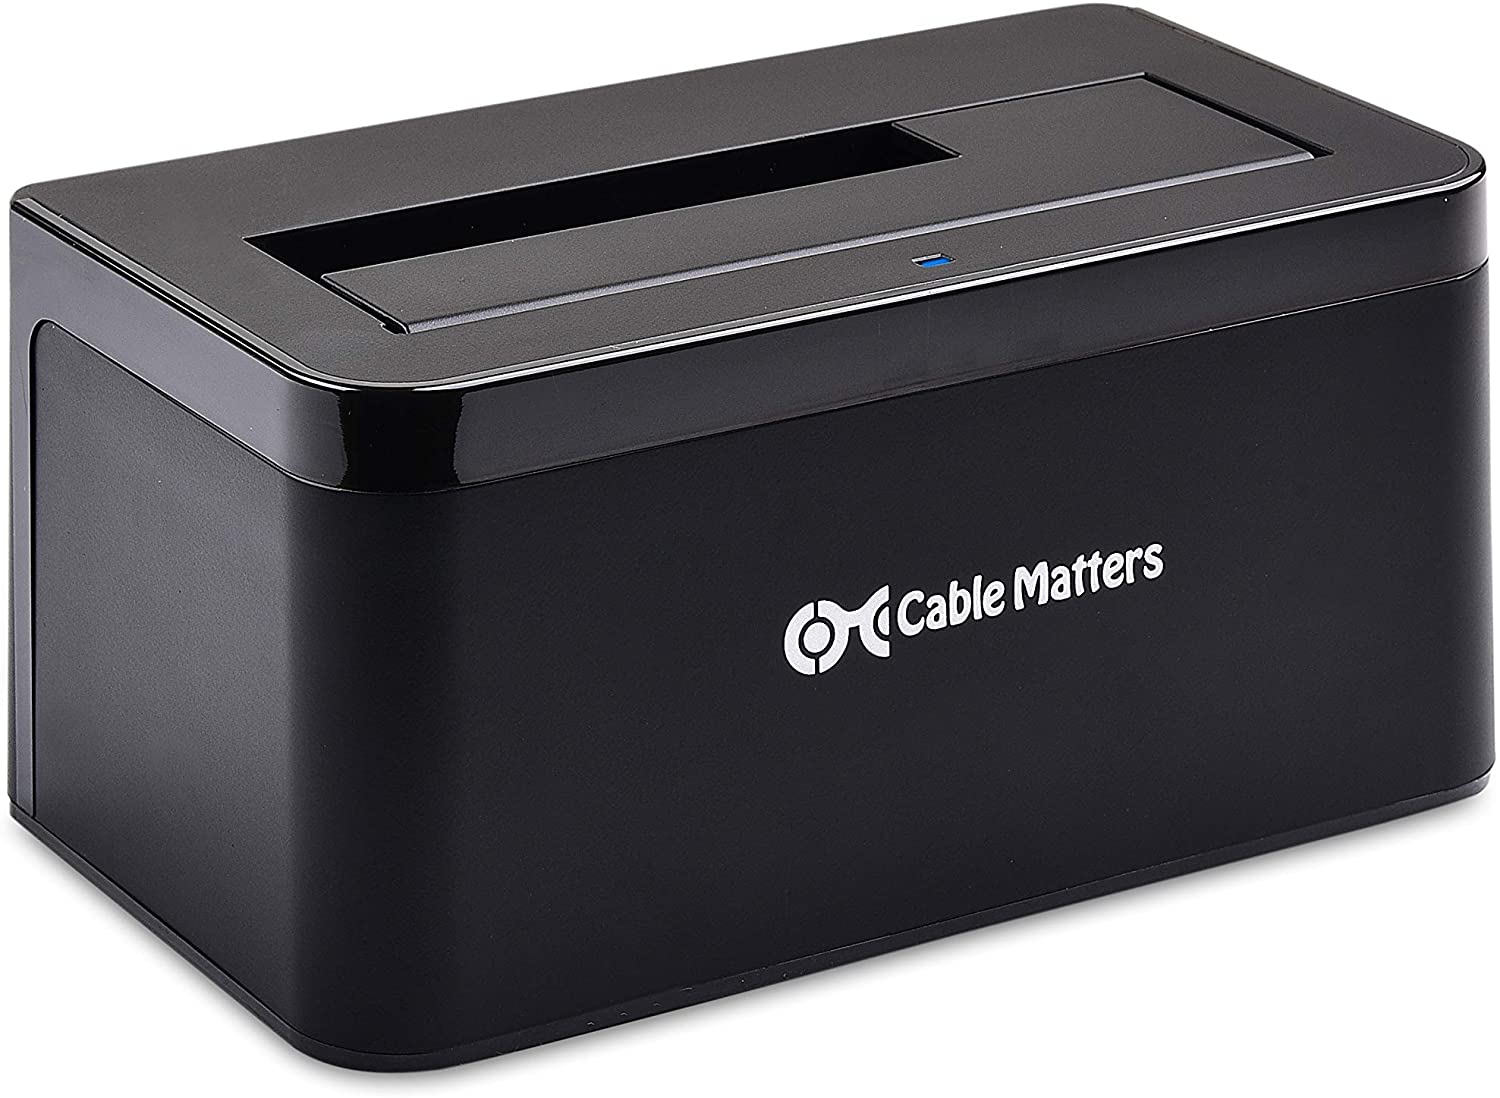 Cable Matters Hard Drive Docking Station